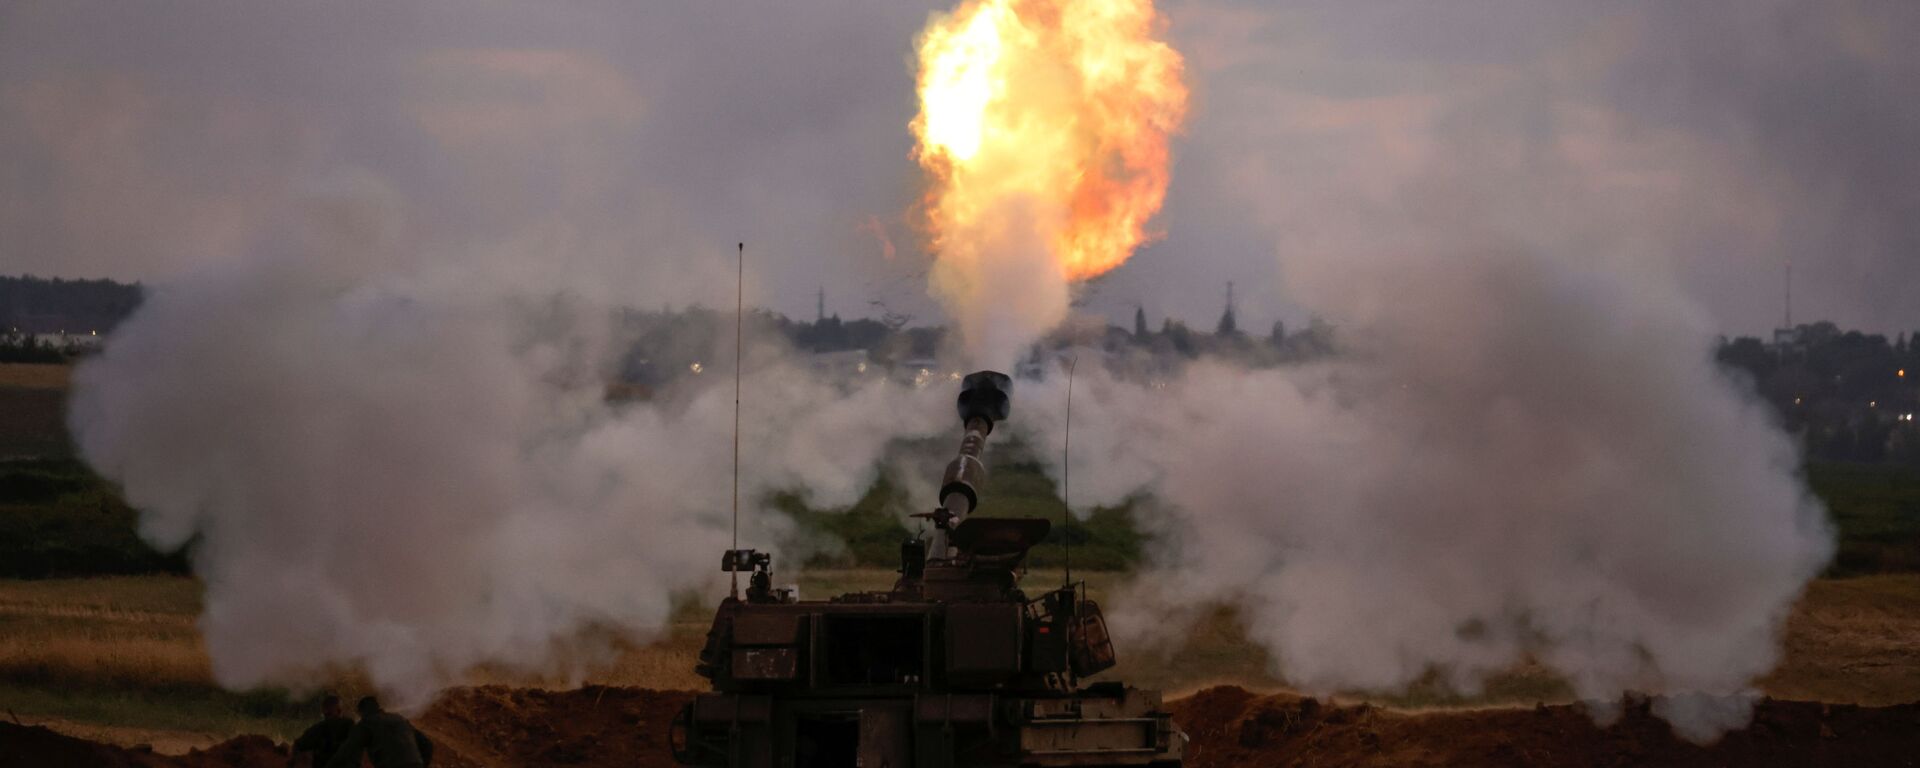 Israeli soldiers work at an artillery unit as it fires near the border between Israel and the Gaza strip, on the Israeli side 17 May 2021 - Sputnik International, 1920, 25.05.2021